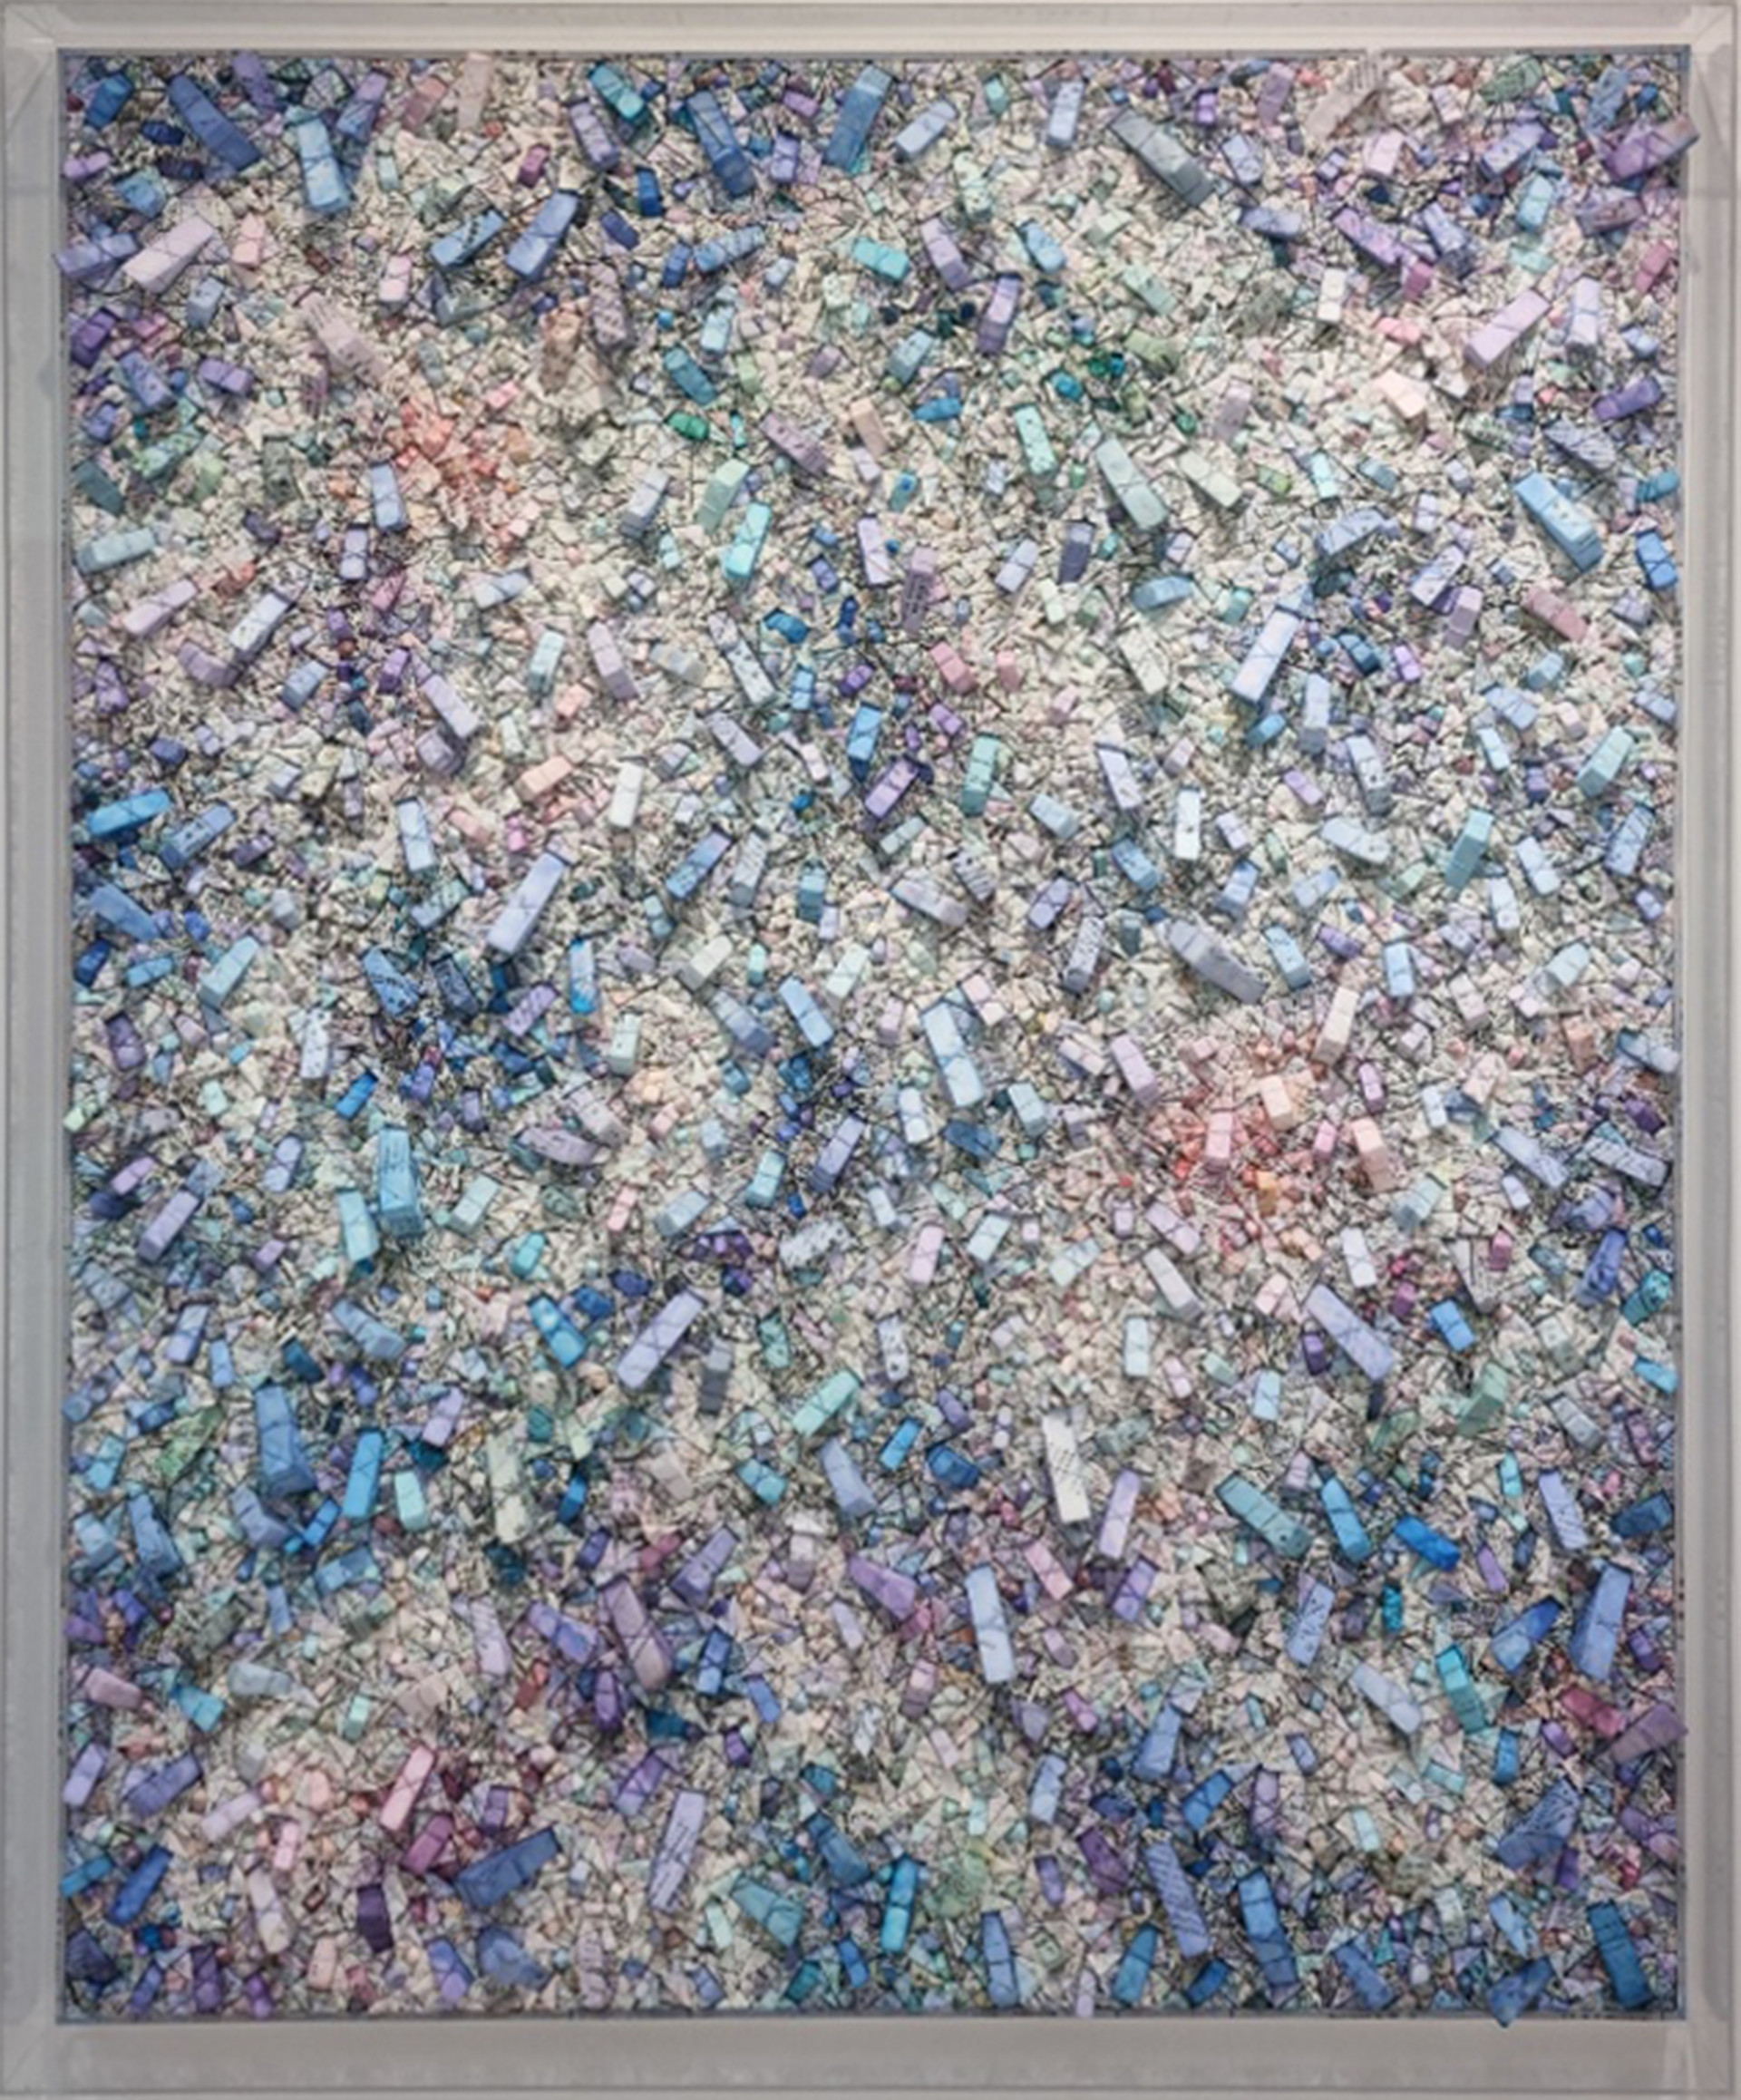 Aggregation19-OC086(Desrie22)"명상"_163x131cm_Mixed Media with Korean Mulberry Paper_2019